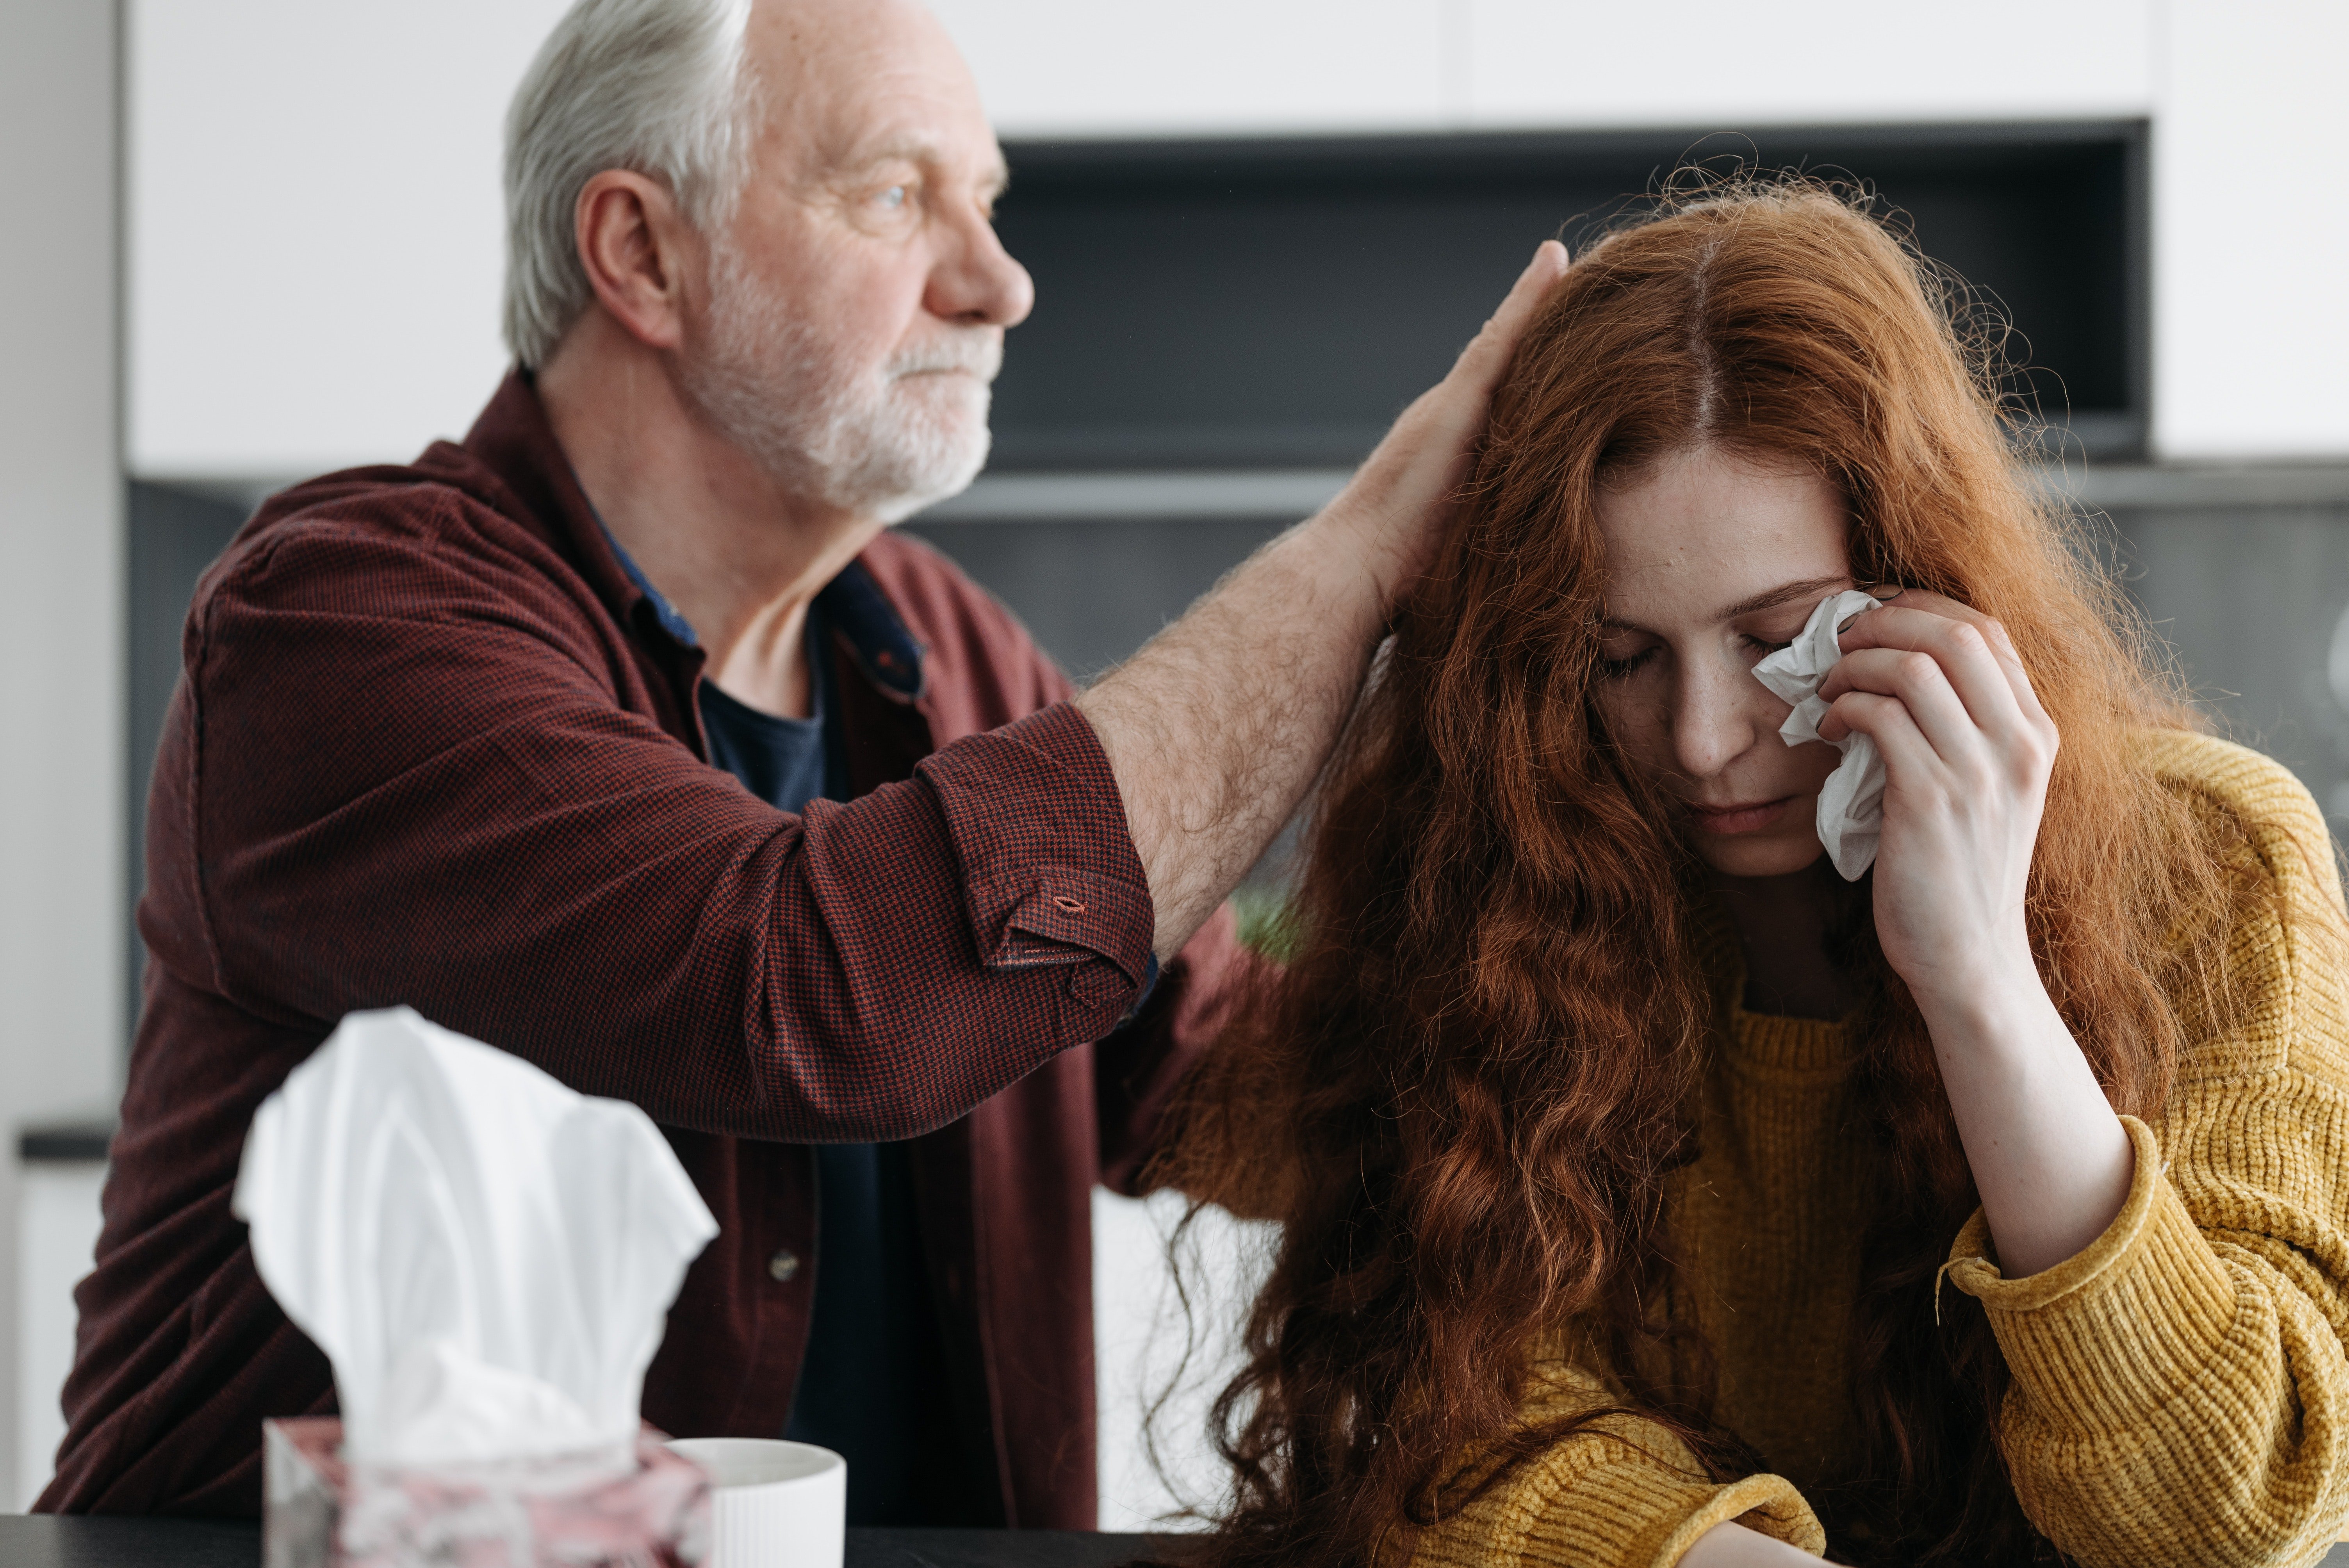 Nicole was in tears when her father forgave her. | Source: Pexels